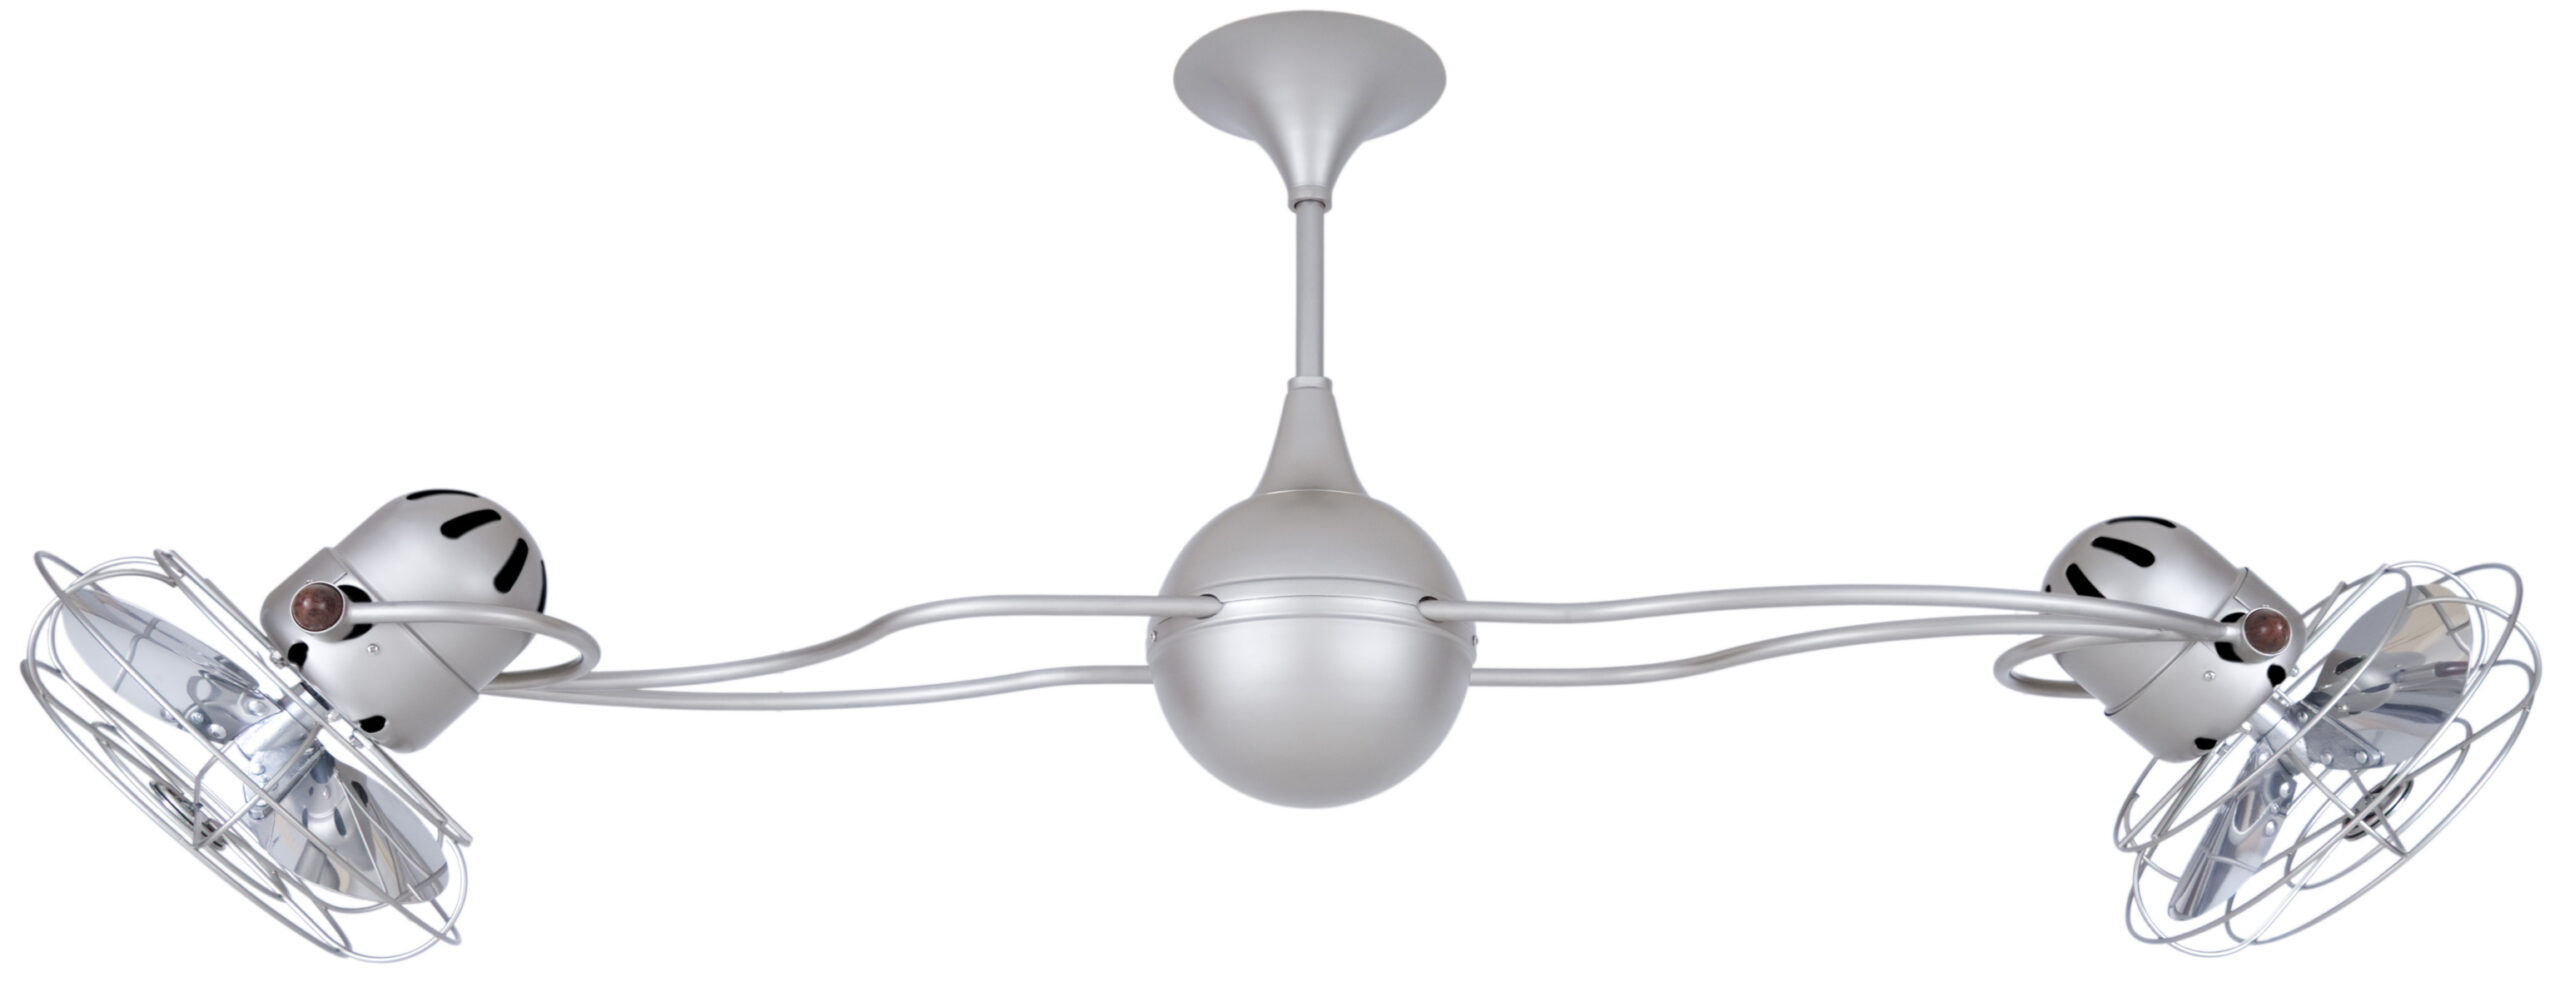 Italo Ventania rotational dual head ceiling fan in Brushed Nickel finish with Metal blades and decorative cage made by Matthews Fan Company.